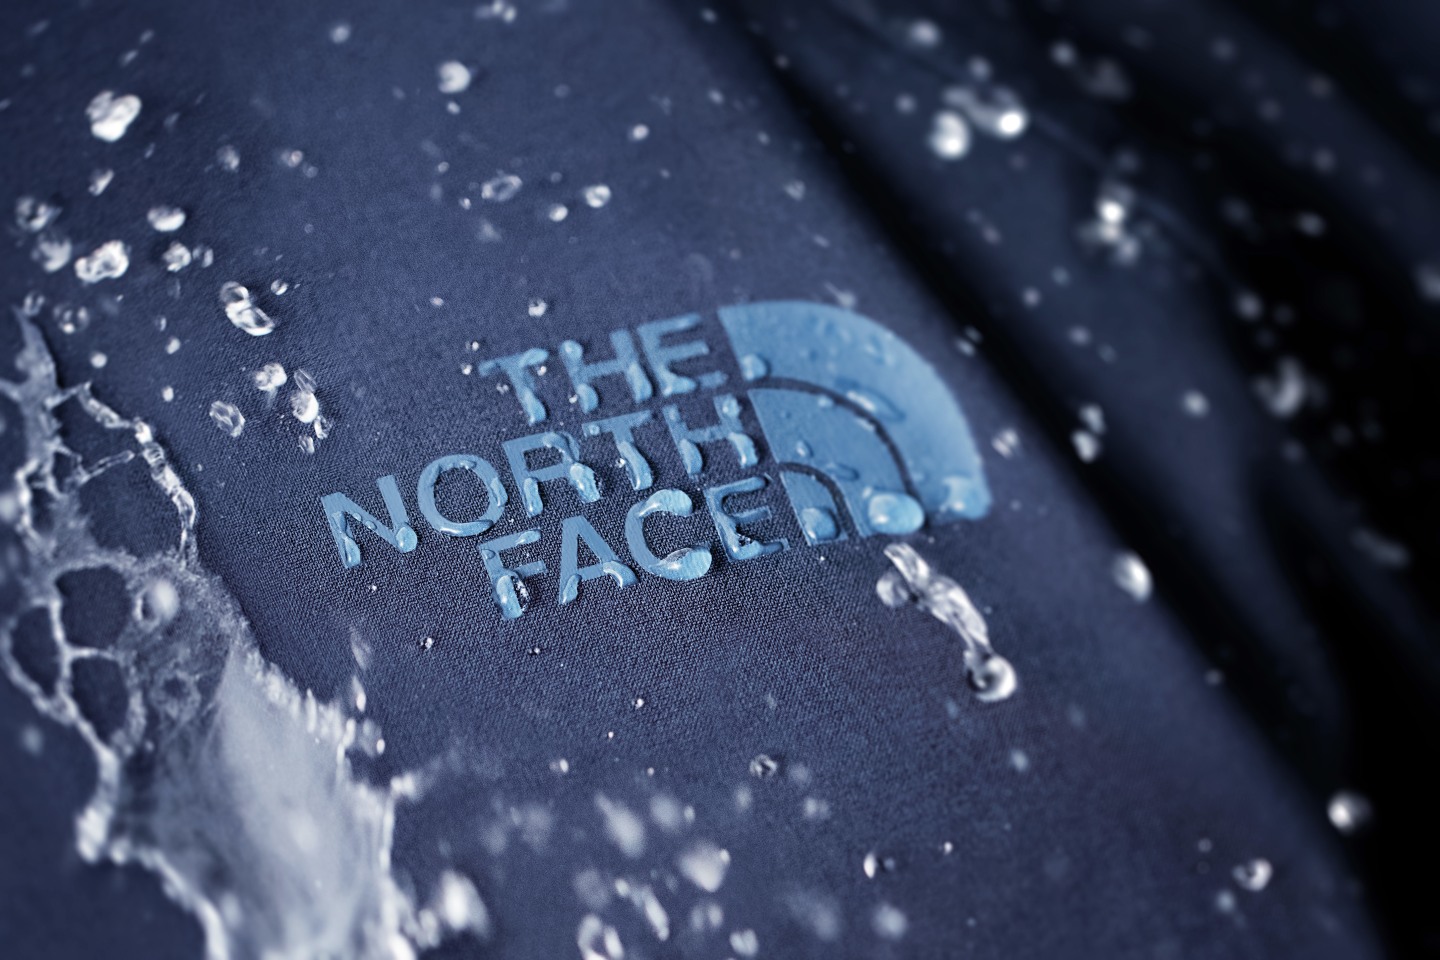 White Denim And North Face Made A Rainy Day Anthem